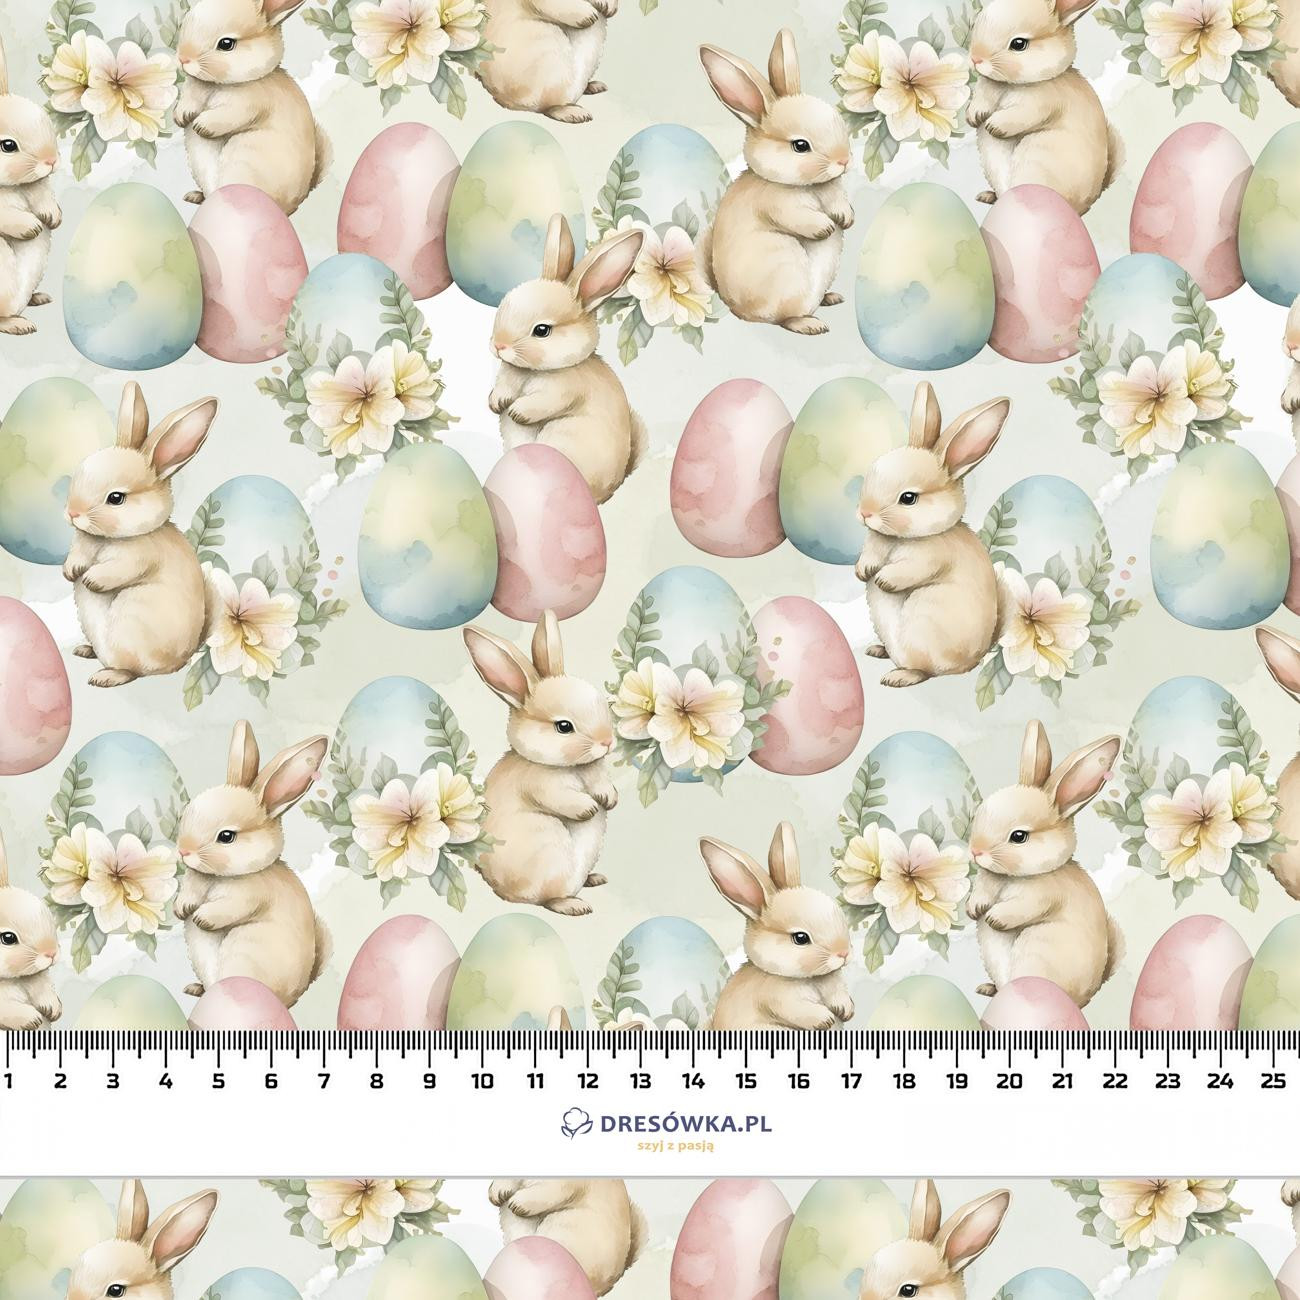 BUNNY EASTER PAT. 2 - looped knit fabric